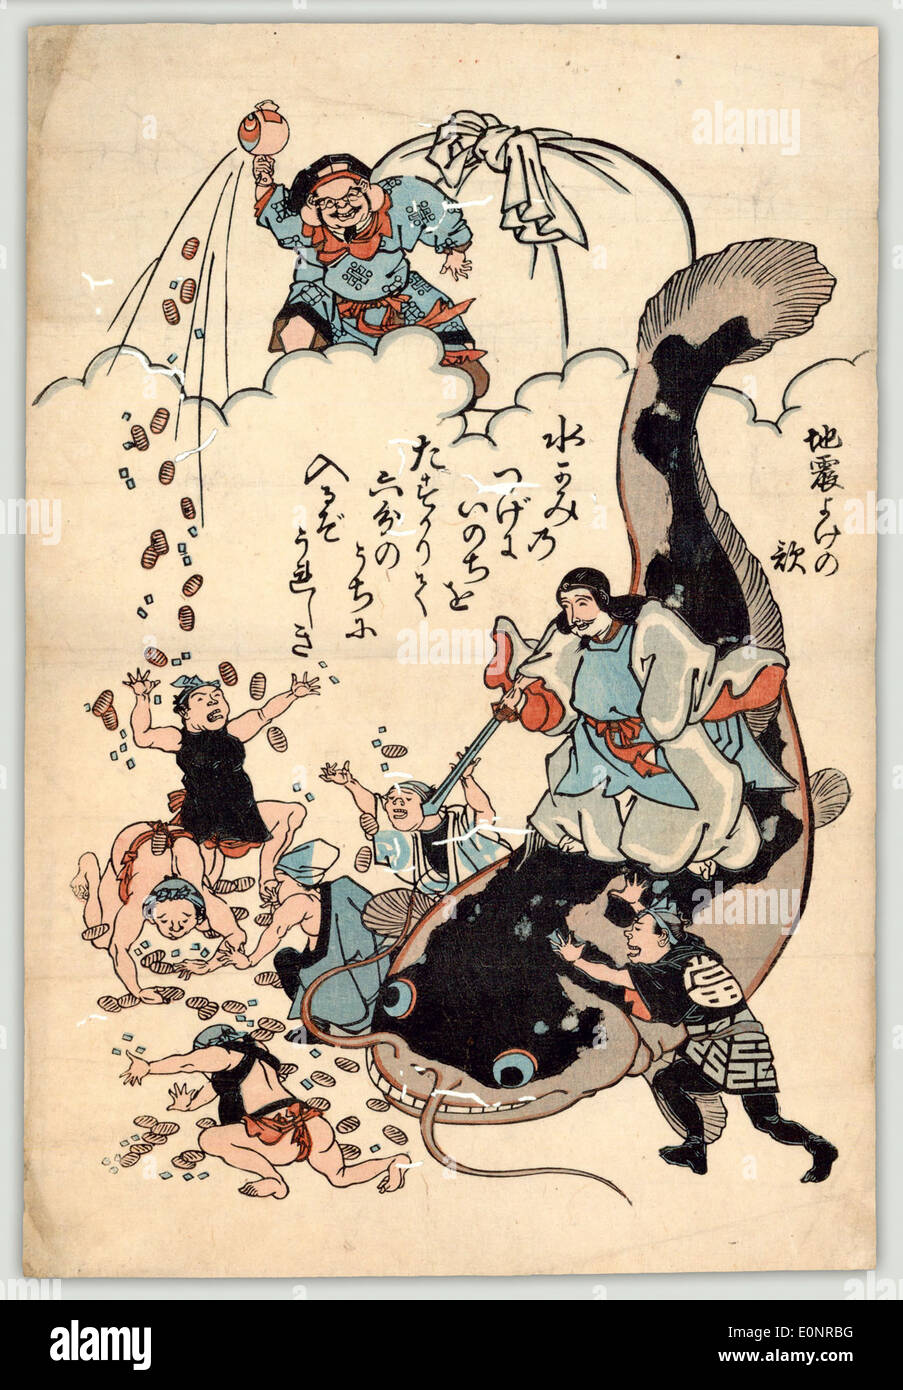 [Daikokuten, a god of wealth, throws money to people below while Namazu, a giant catfish, is held down by Kashima/Takemikazuch, a god of thunder and swords] Stock Photo